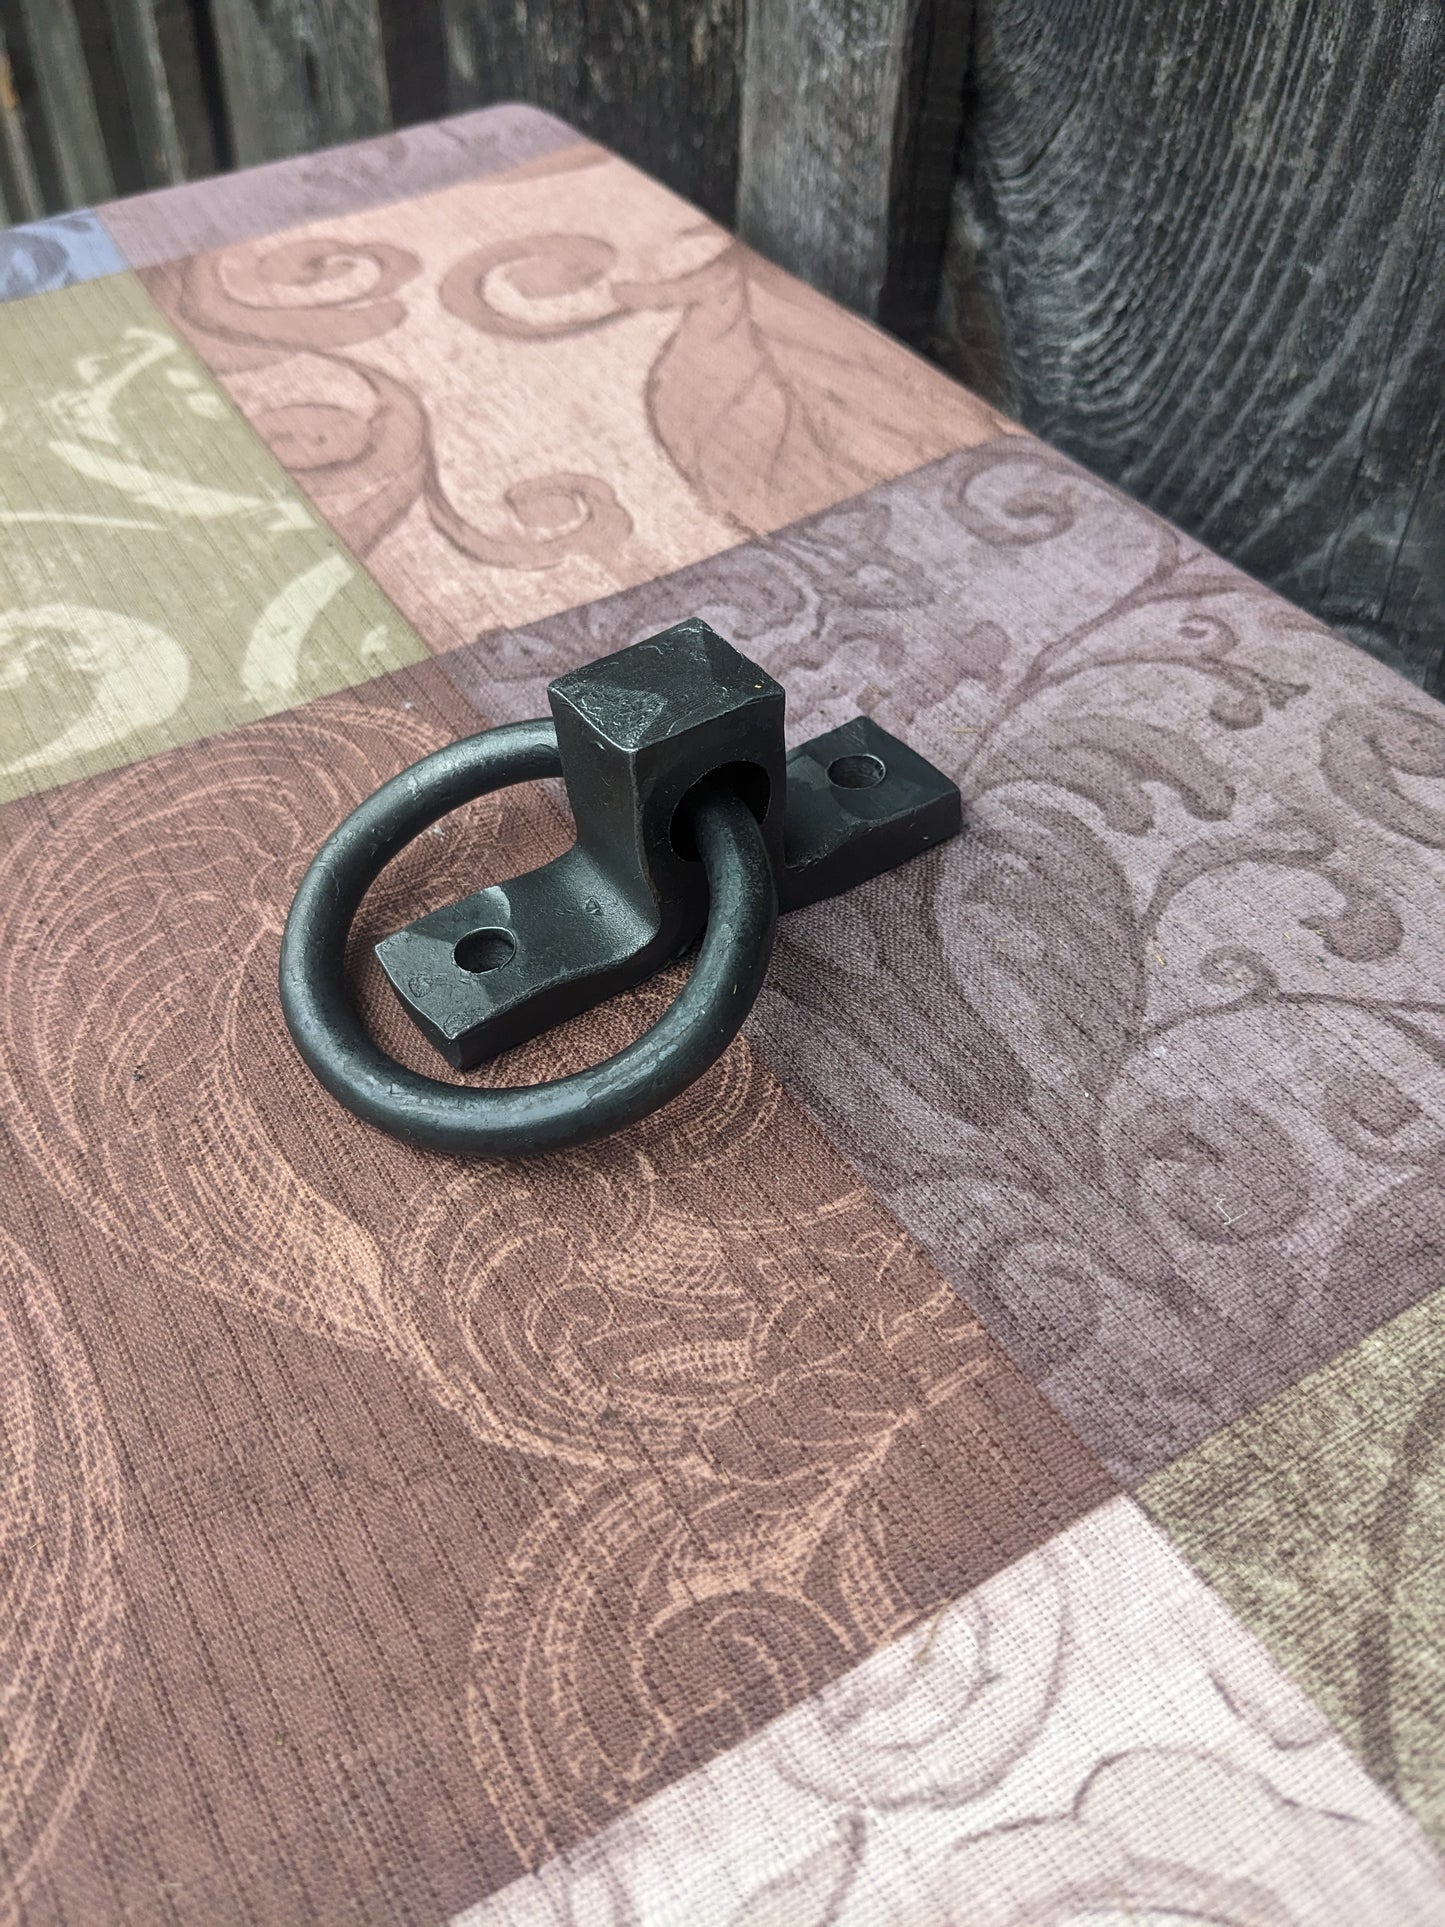 Small hand forged ring handle sitting on a colorful tablecloth in front of a barn wood background.